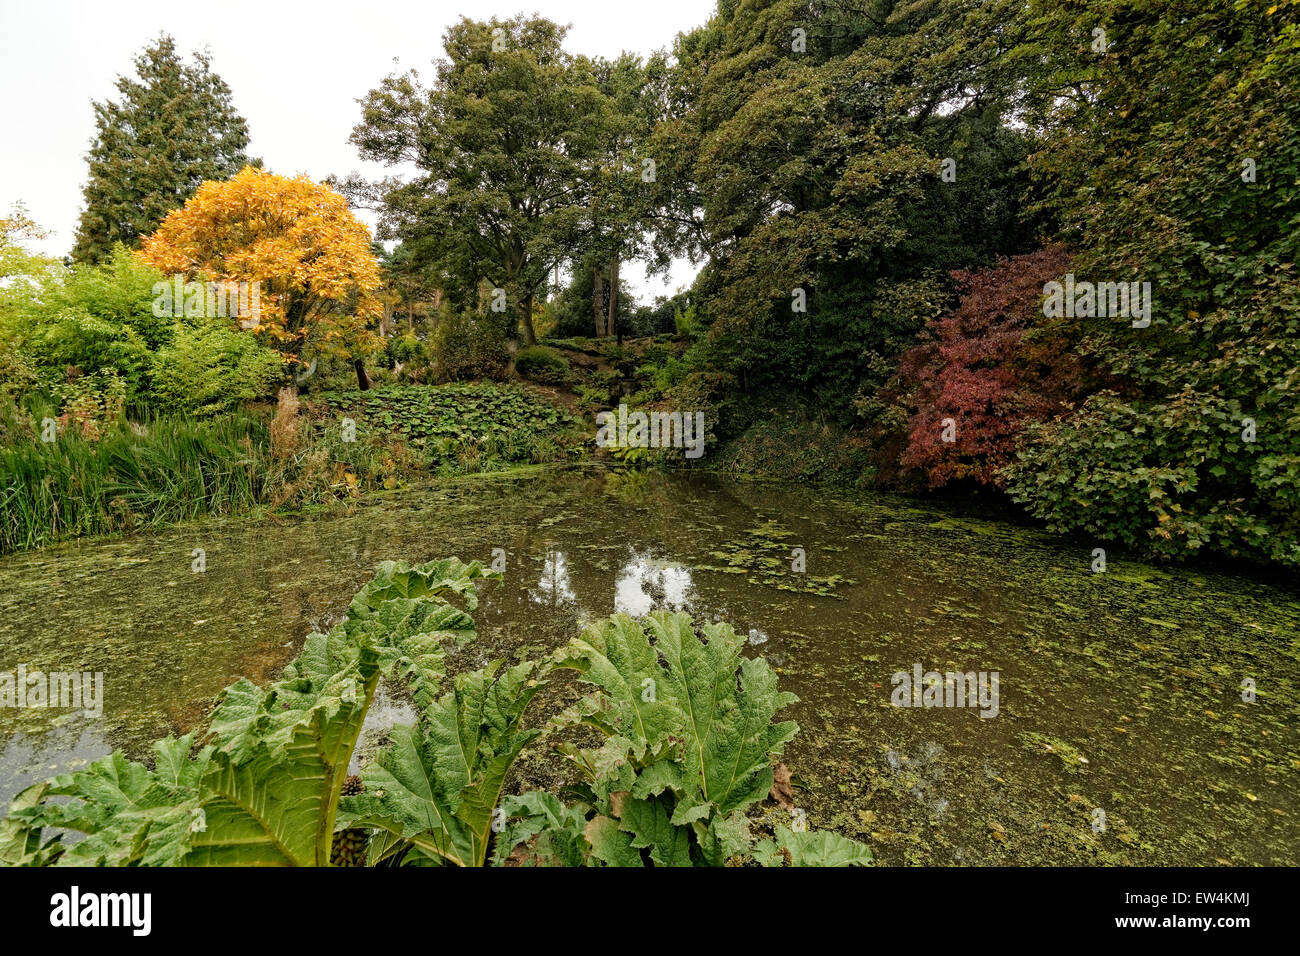 Ness Botanic Gardens are situated near the English and Welsh Border in Cheshire, near to the city of Chester . Stock Photo